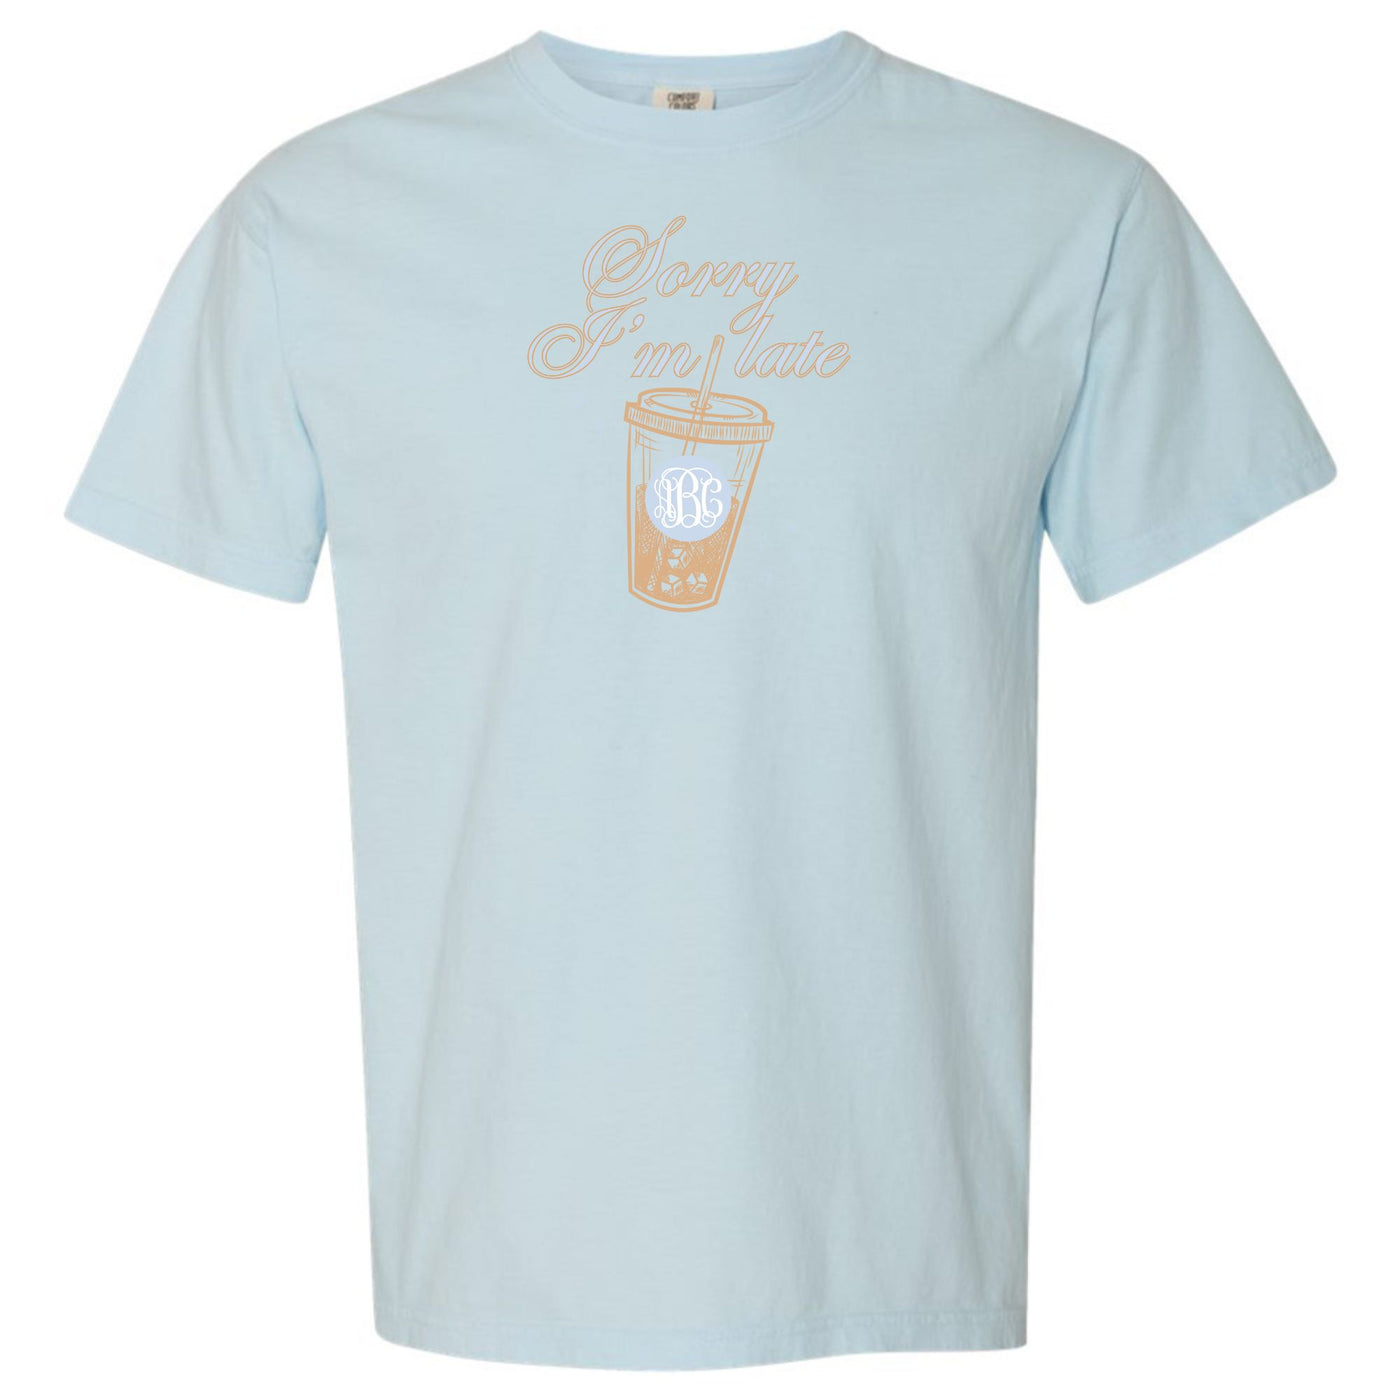 Monogrammed 'Sorry I'm Late' T-Shirt